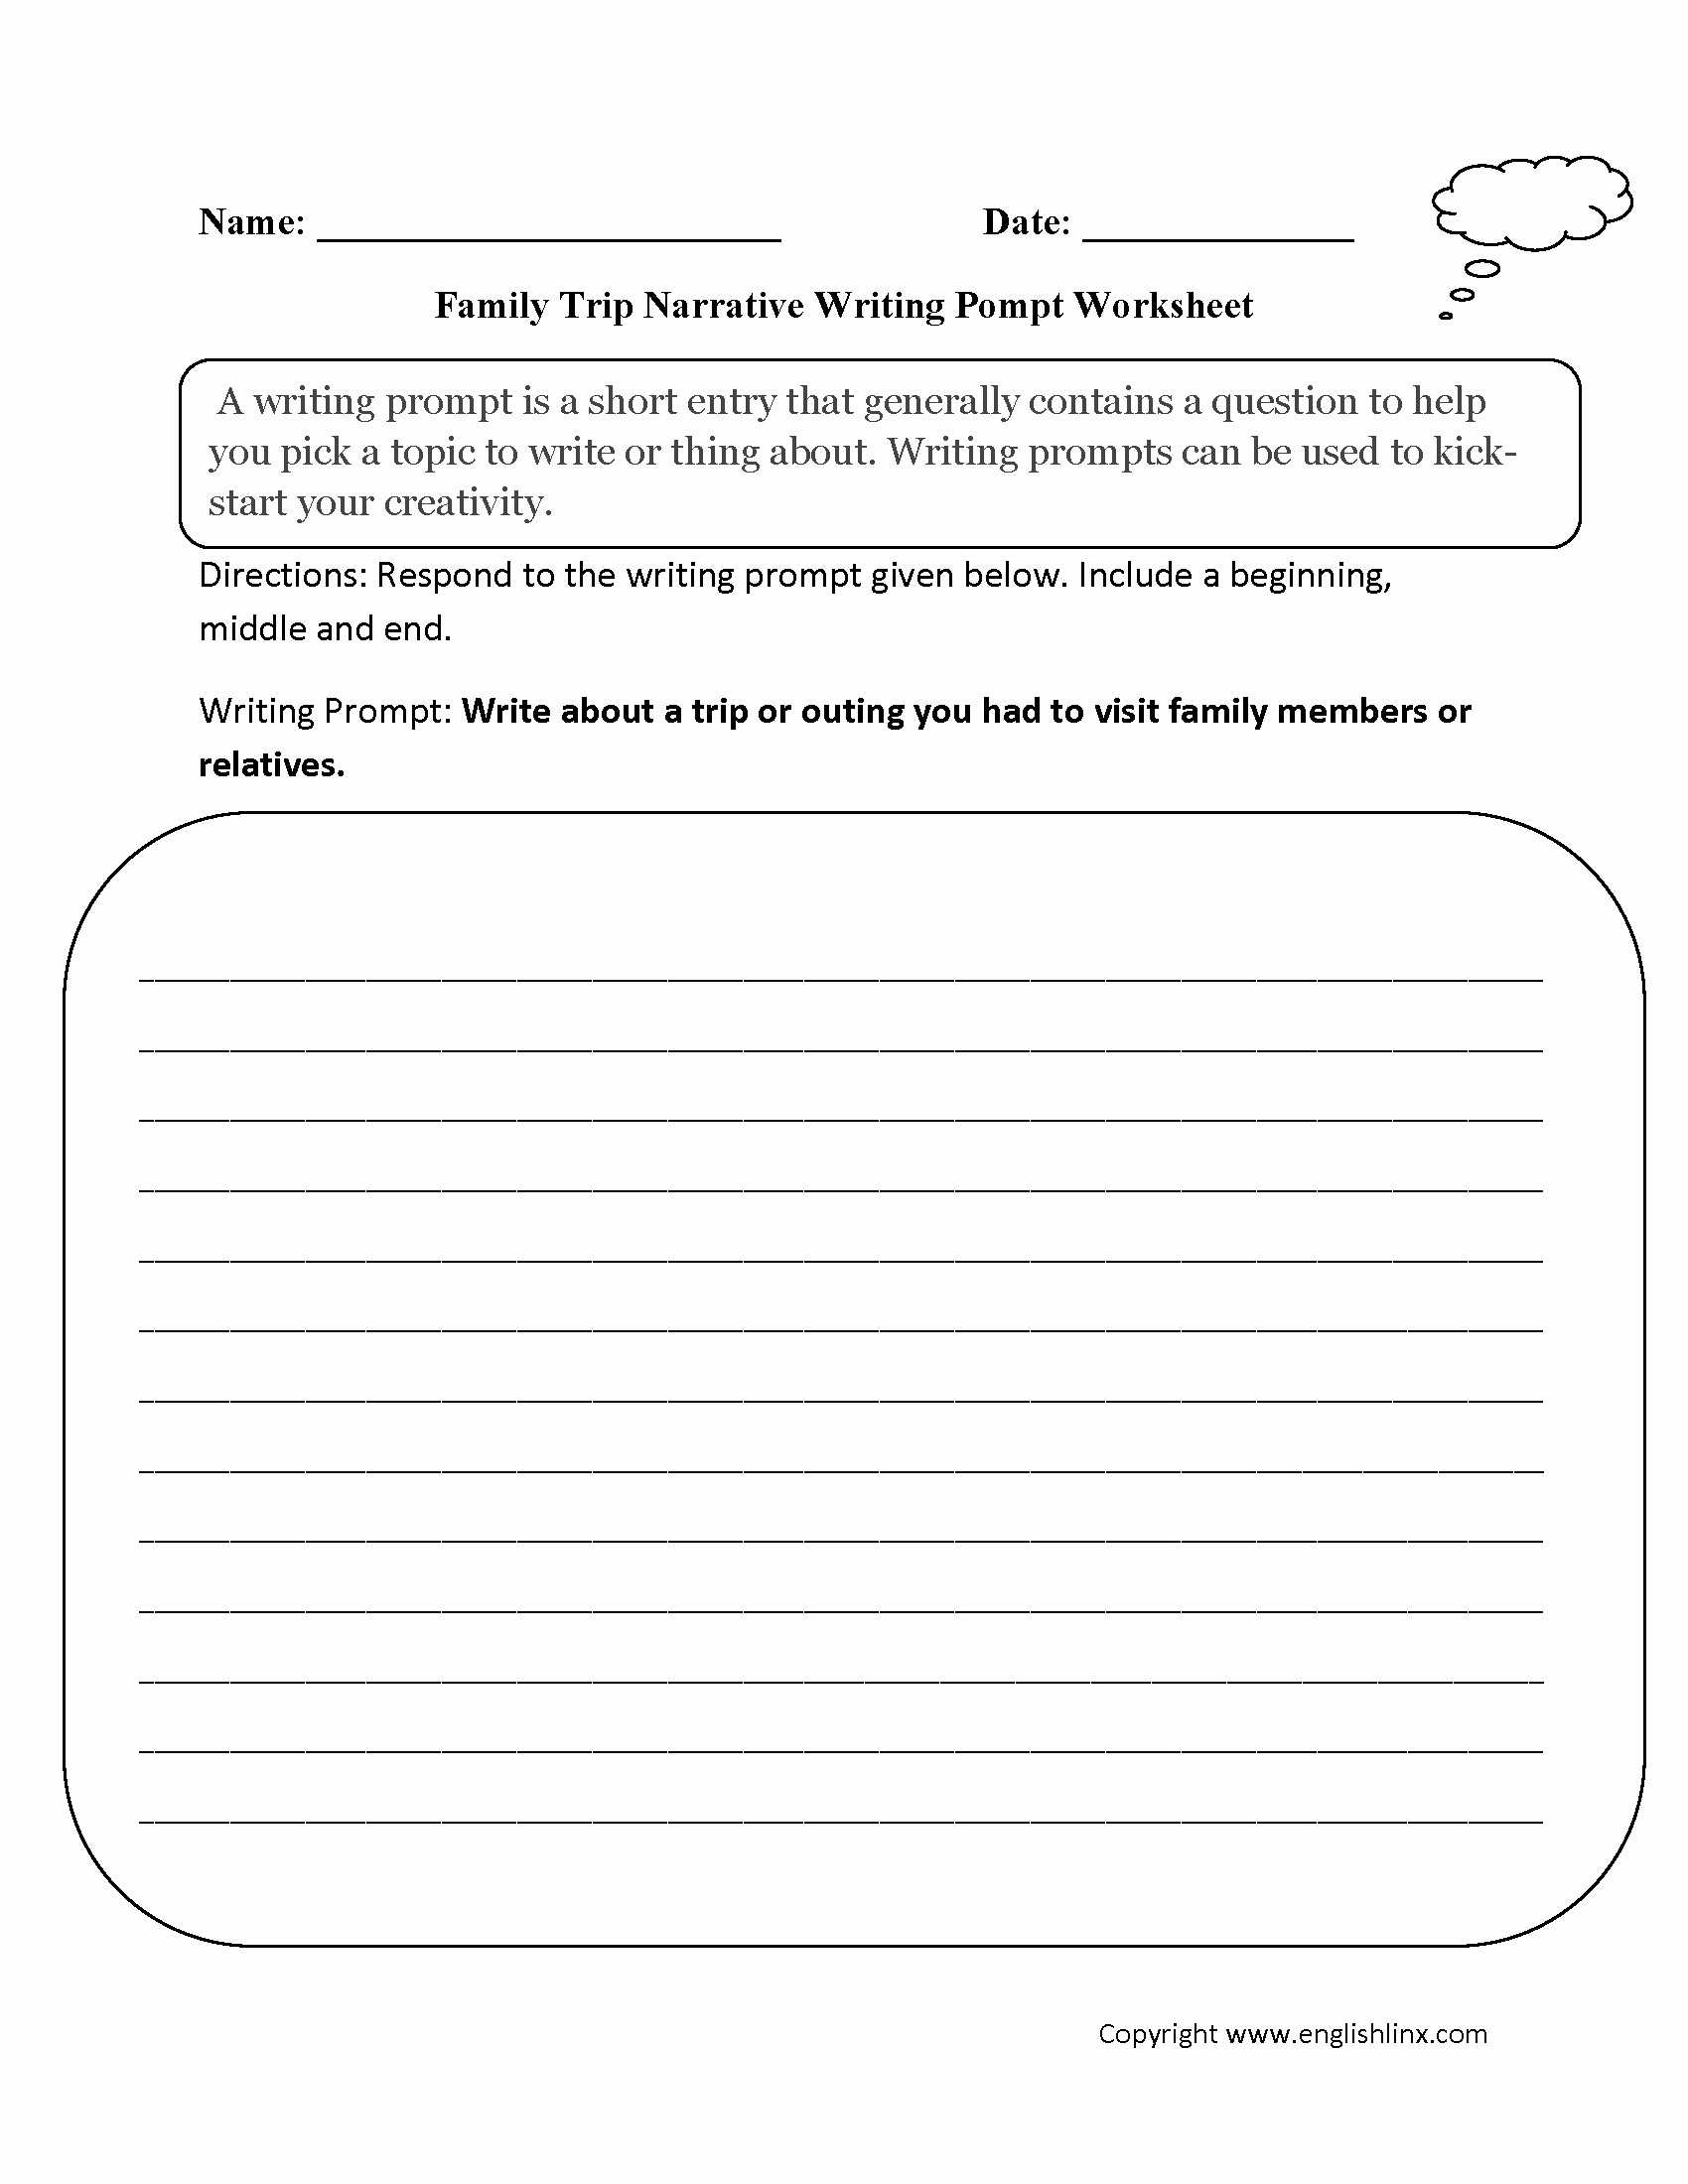 Respect Worksheets Pdf Along with Context Clues Worksheets Middle School Pdf Image Collections